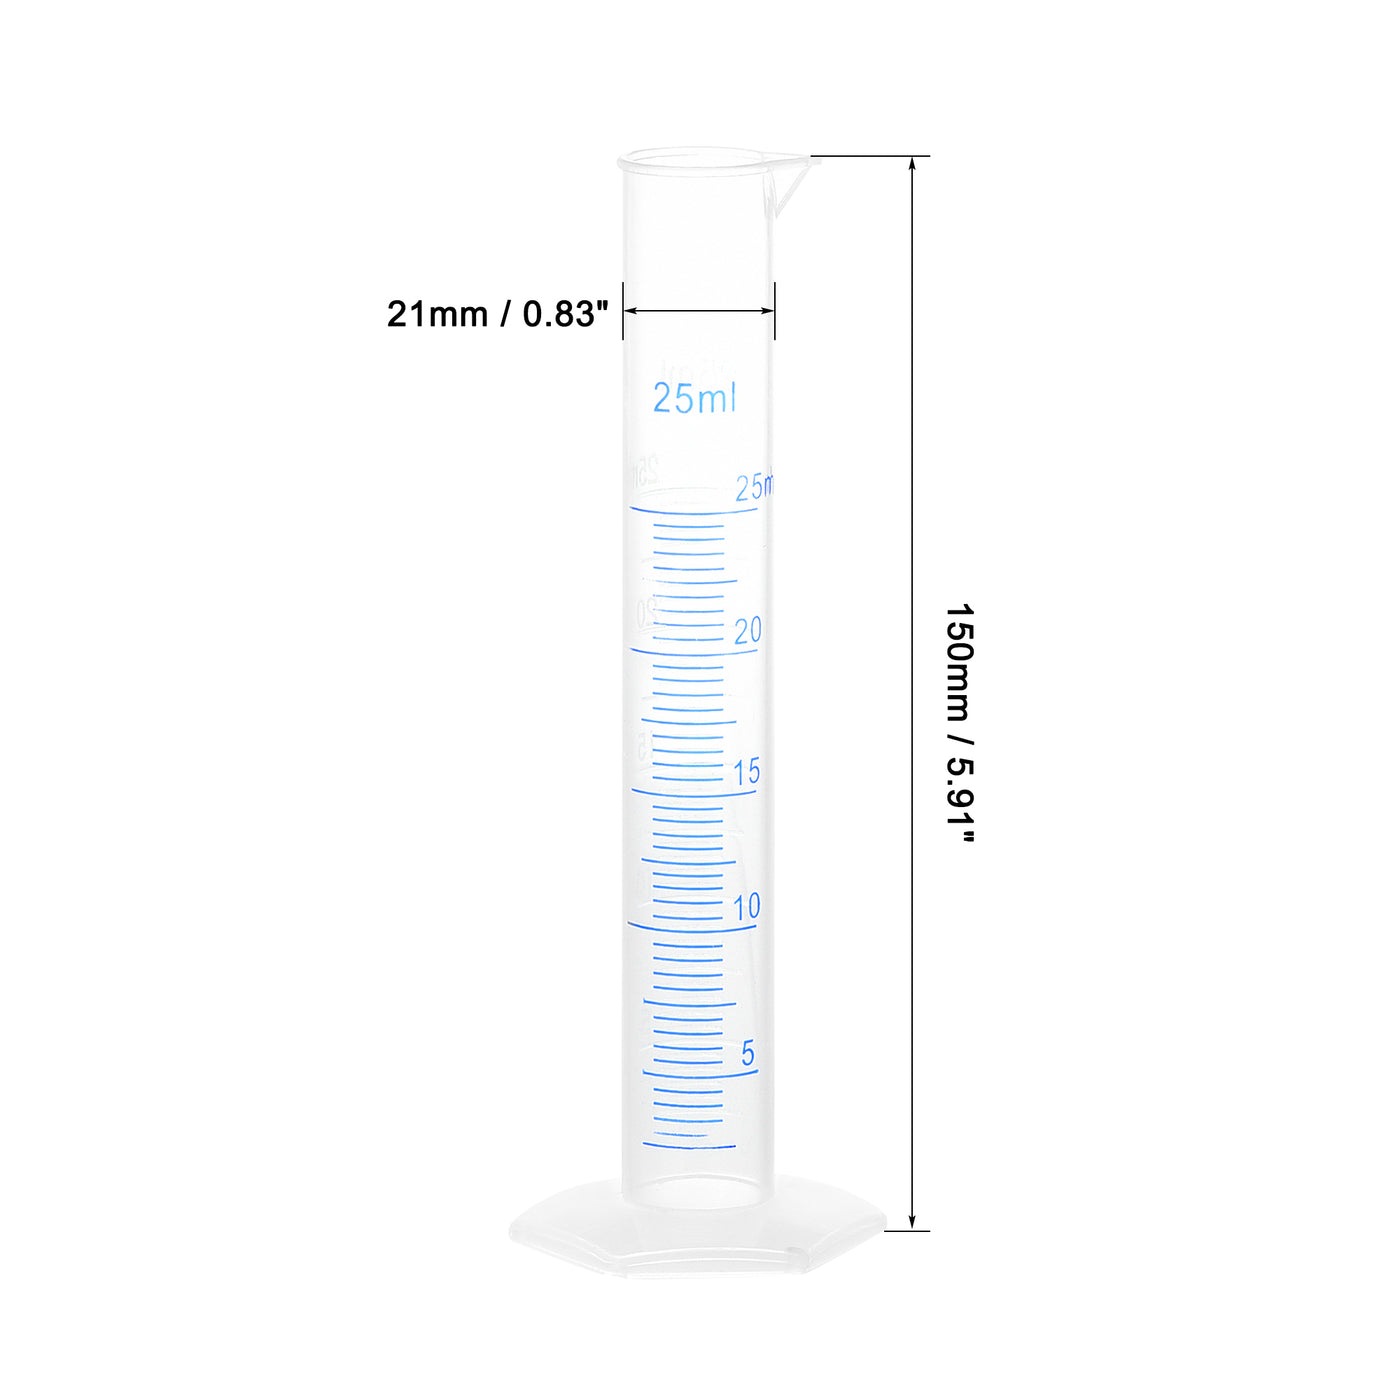 uxcell Uxcell Plastic Graduated Cylinder, 25ml Measuring Cylinder 2-Sided Metric Marking 12Pcs